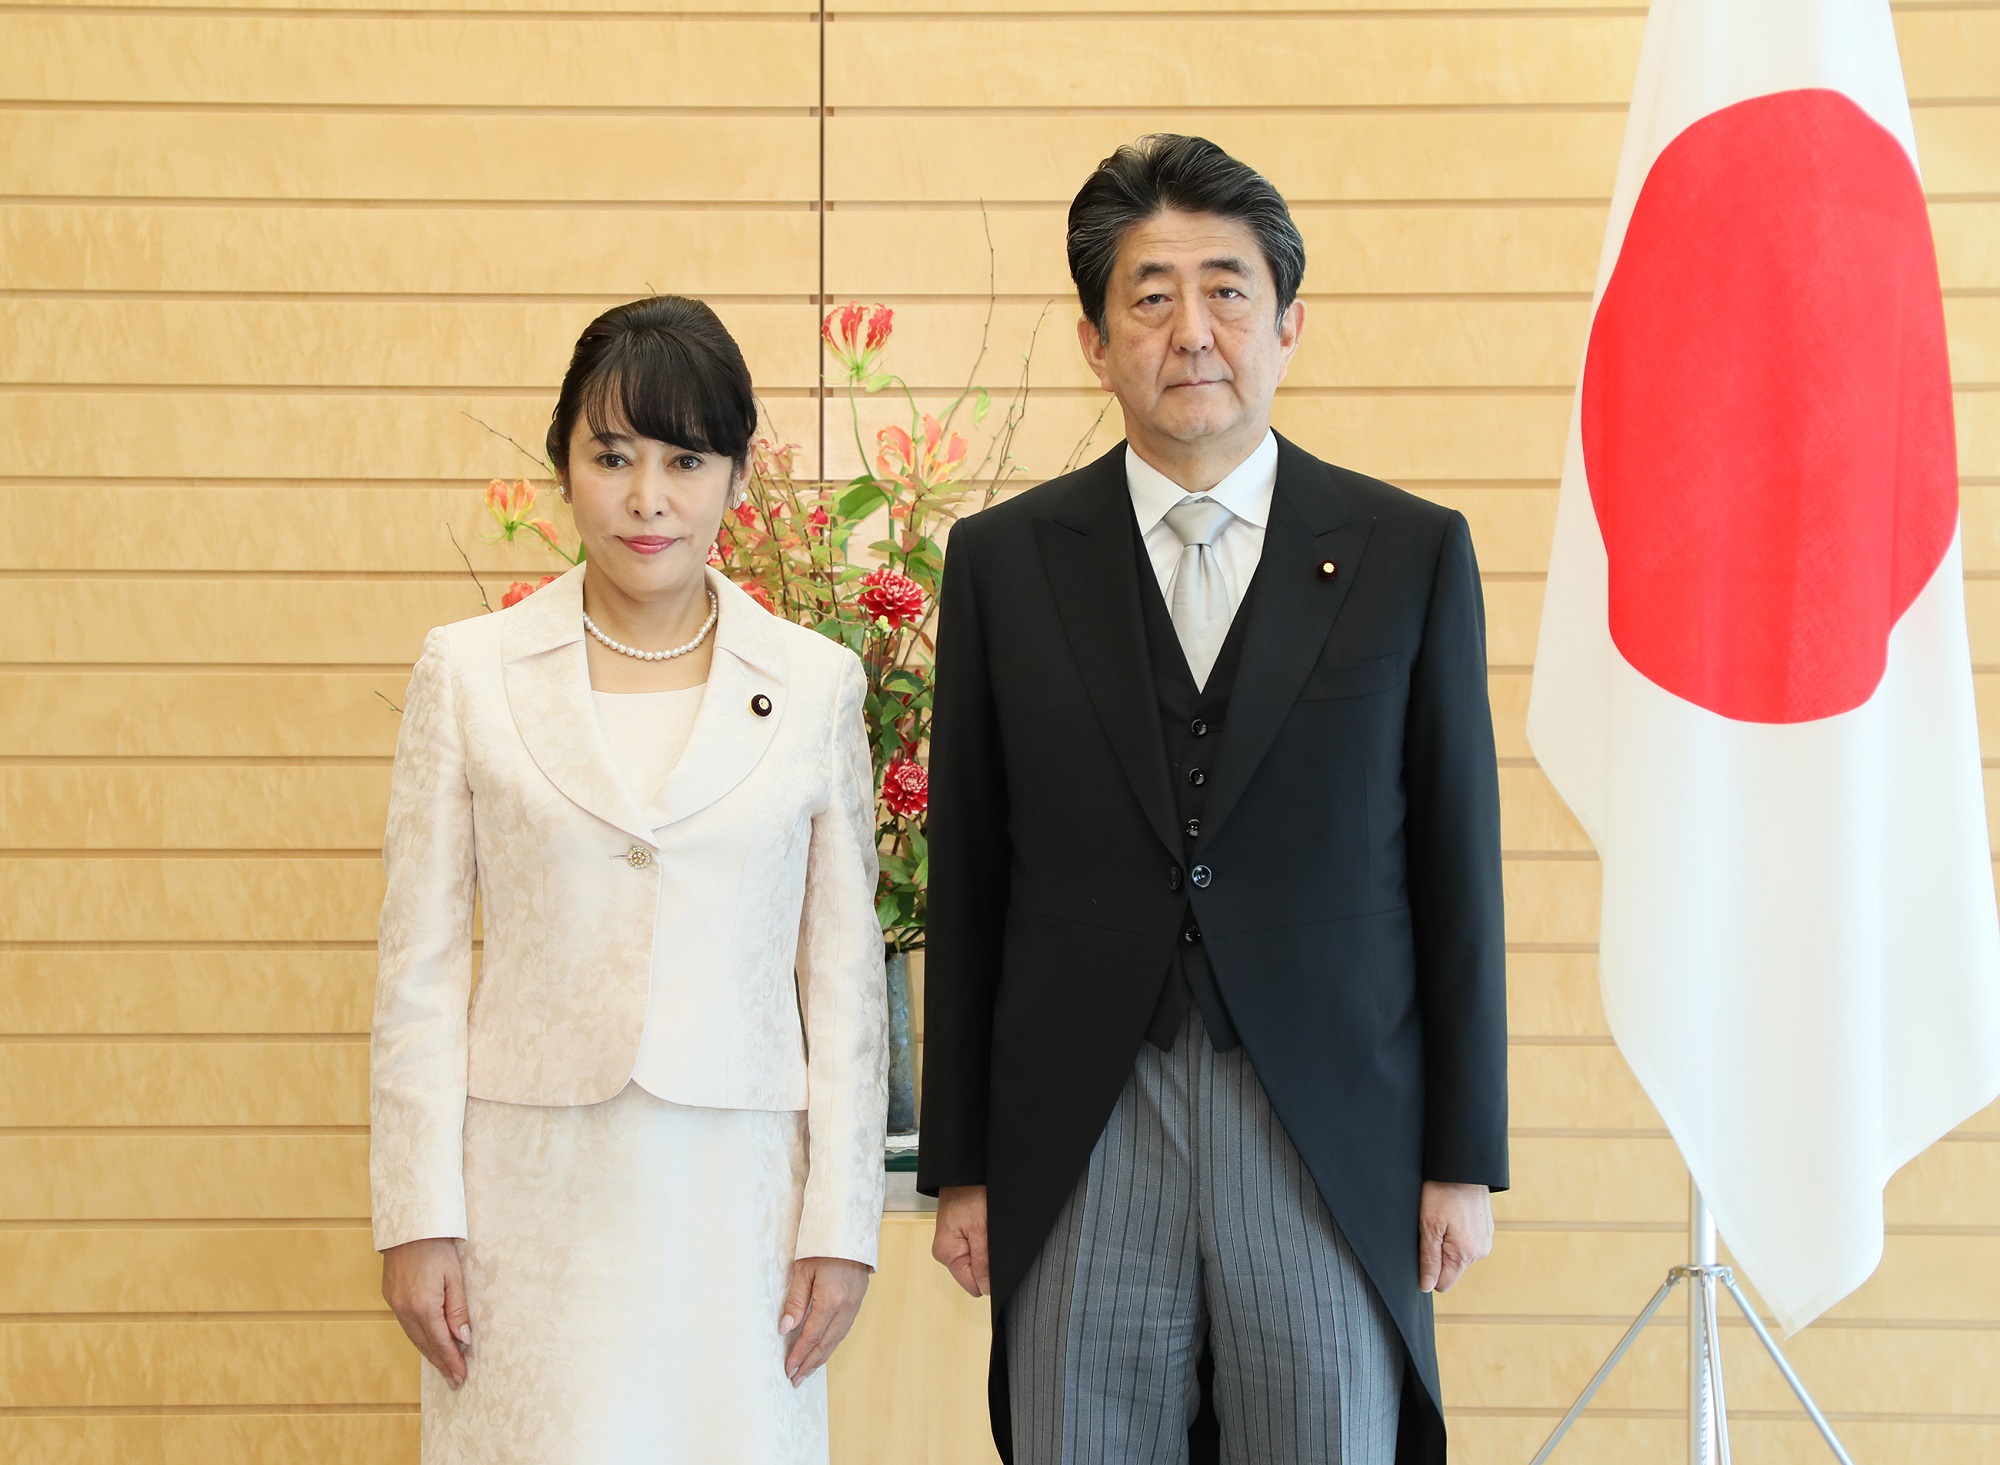 Giving a Letter of Assignment (Minister) (The Prime Minister in Action) |  Prime Minister of Japan and His Cabinet